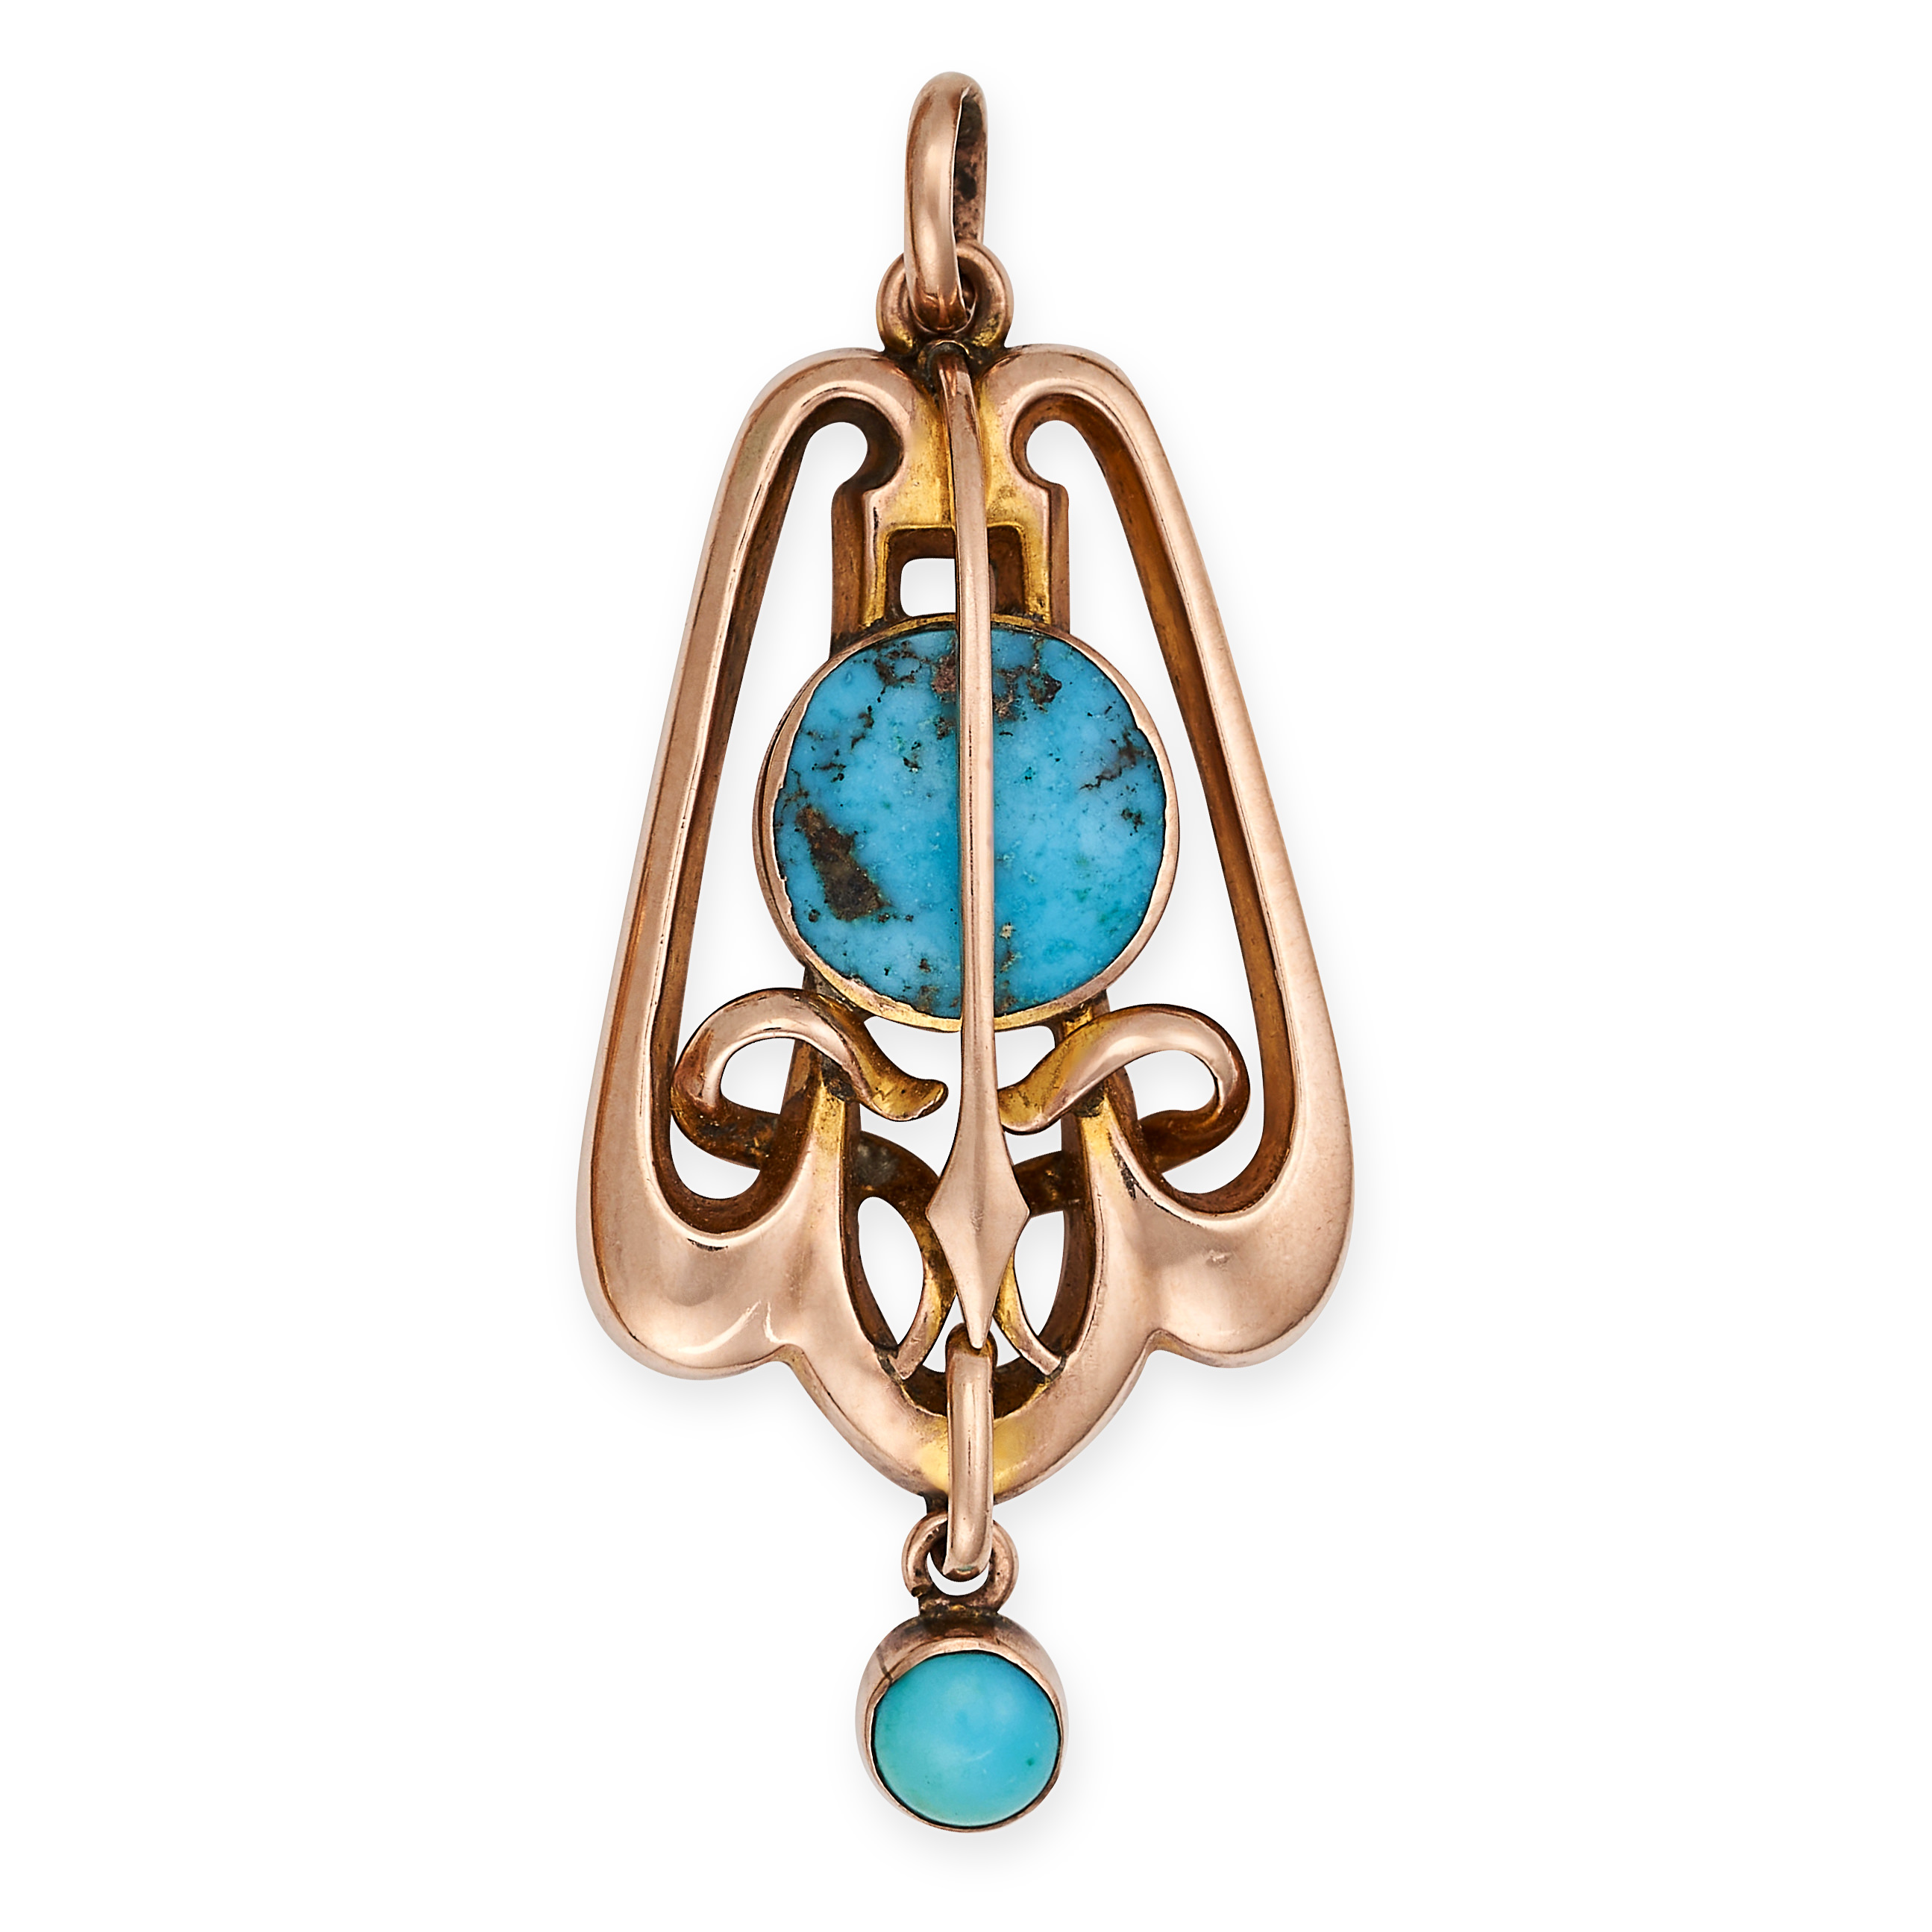 AN ANTIQUE TURQUOISE PENDANT, CIRCA 1900 in 9ct yellow gold, set with two round cabochon